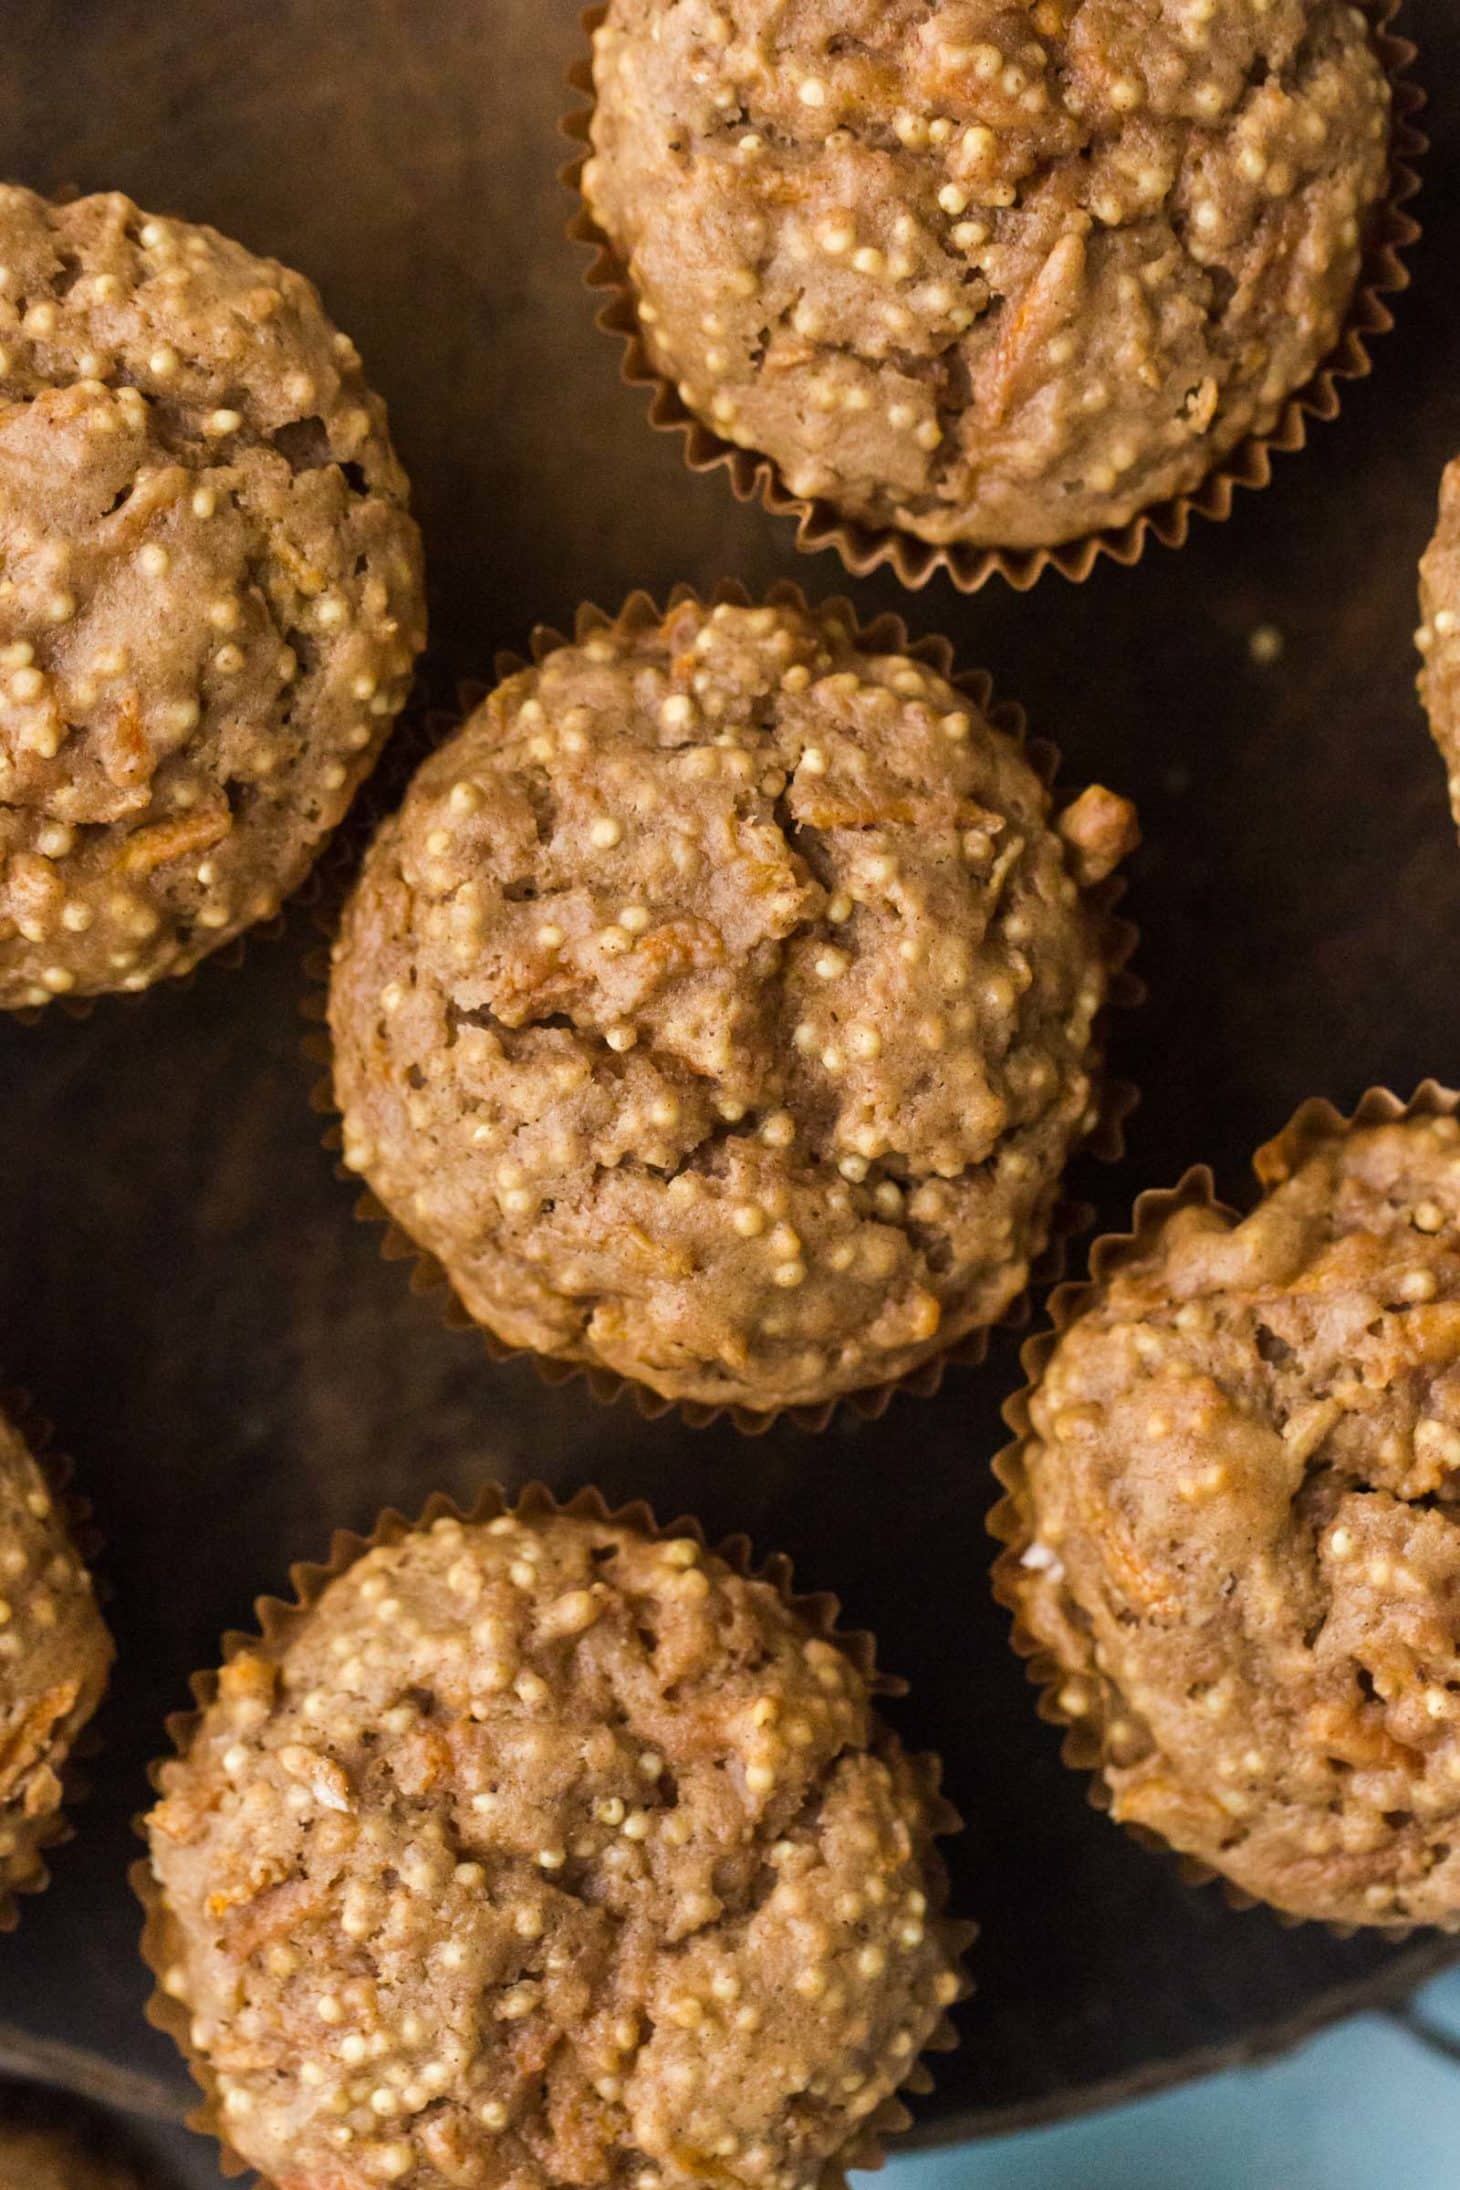 Spiced Carrot Muffins with Millet